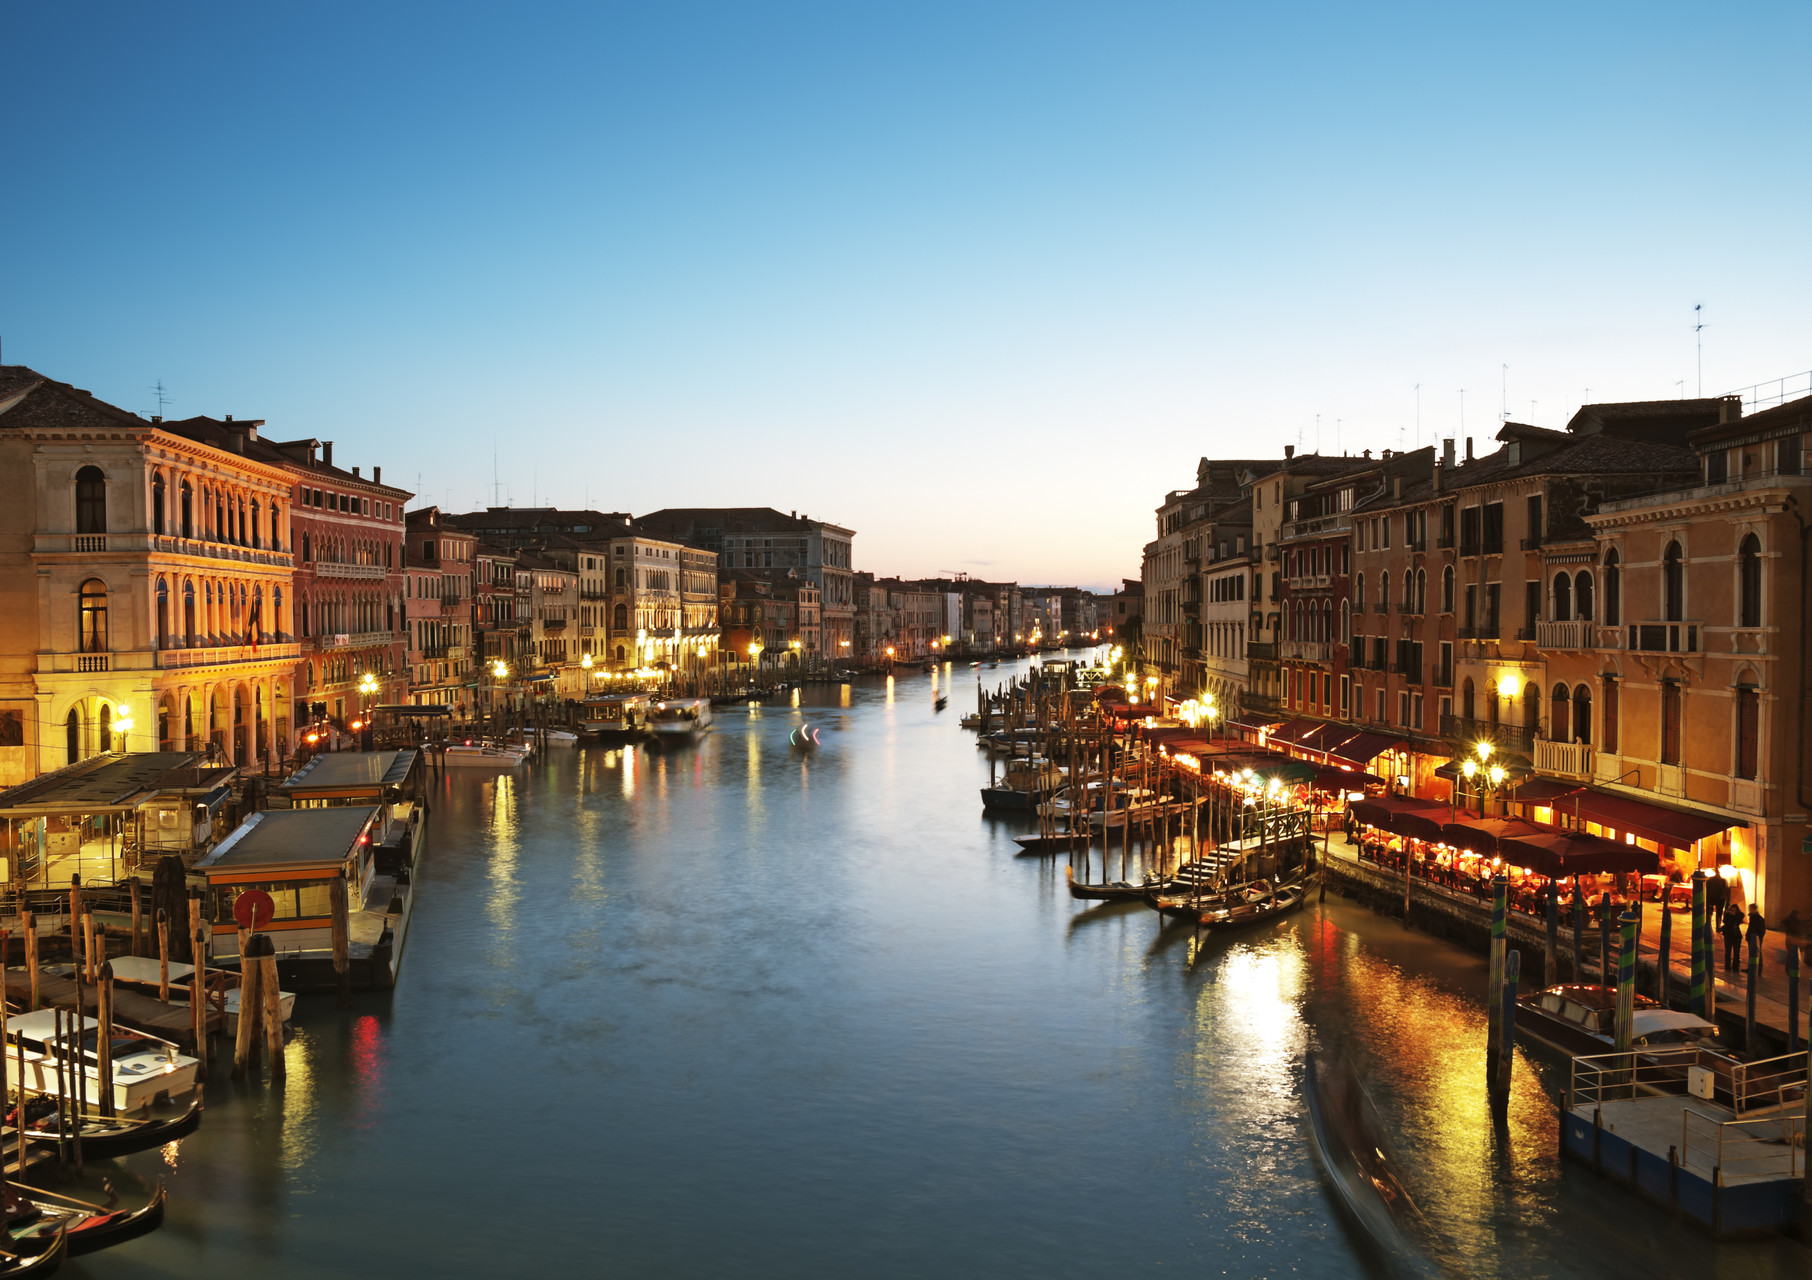 Glimpse from the Grand Canal, Venice, at dusk